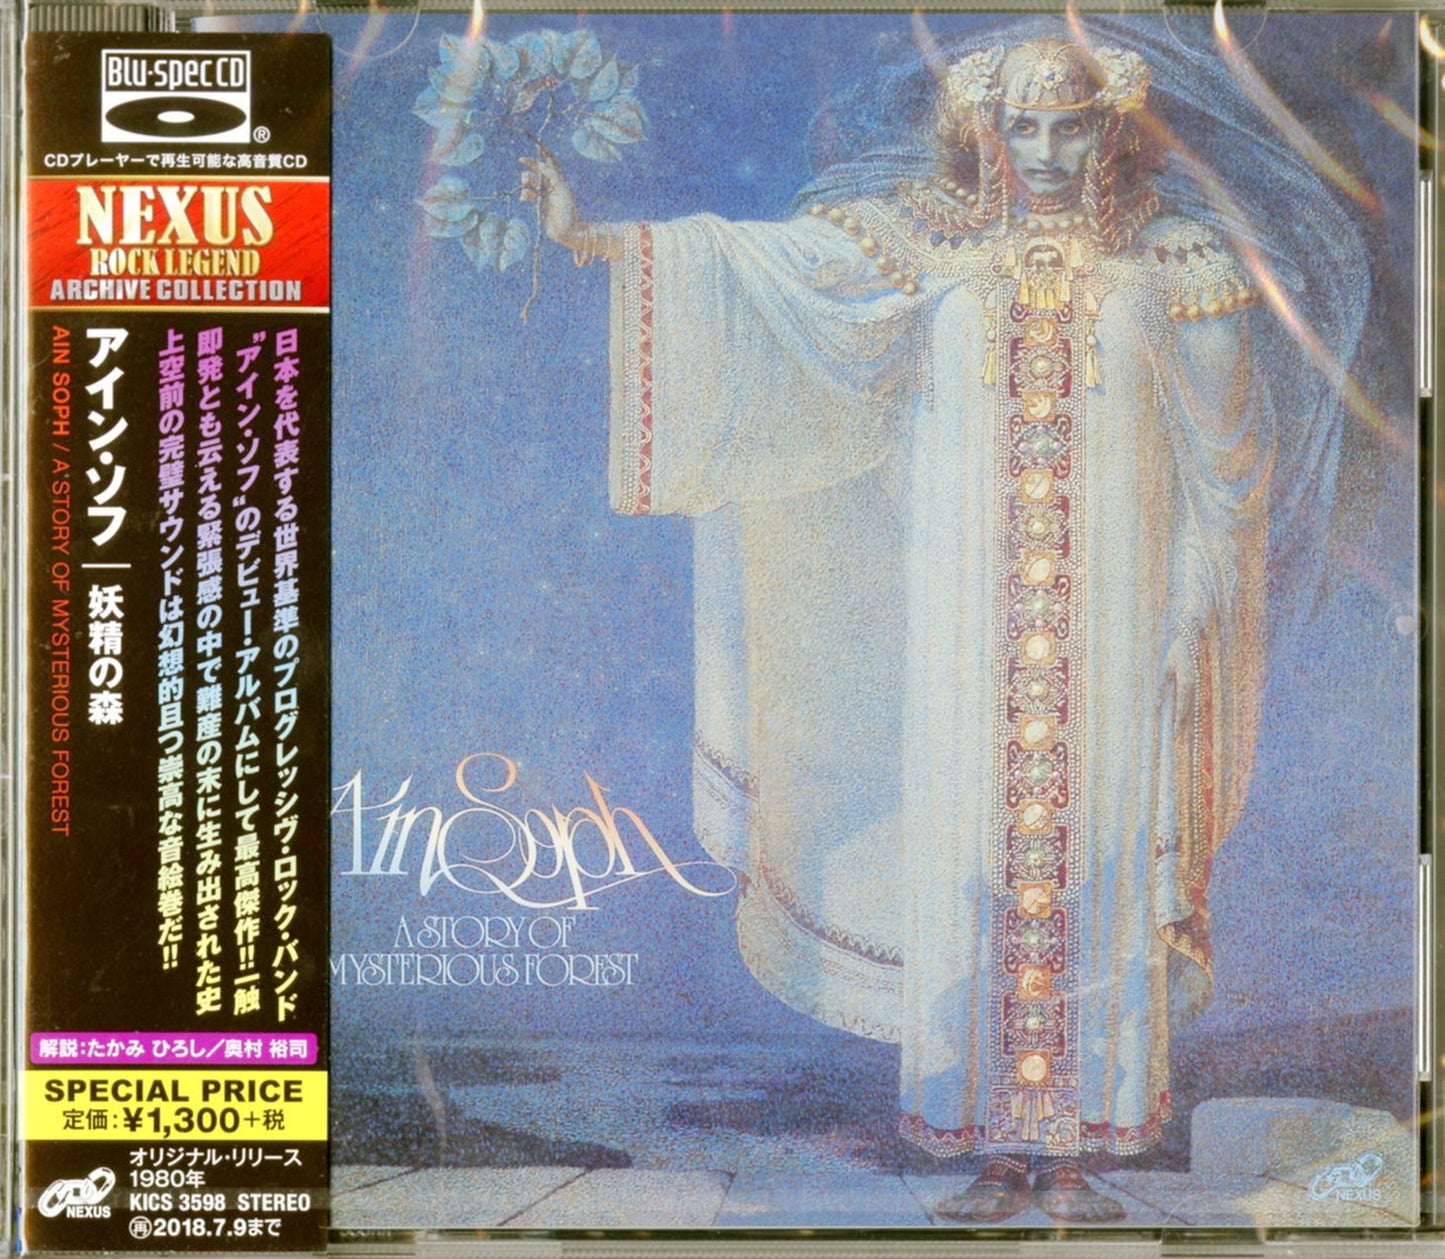 Ain Soph - A Story Of Mysterious Forest - Japan  Blu-spec CD